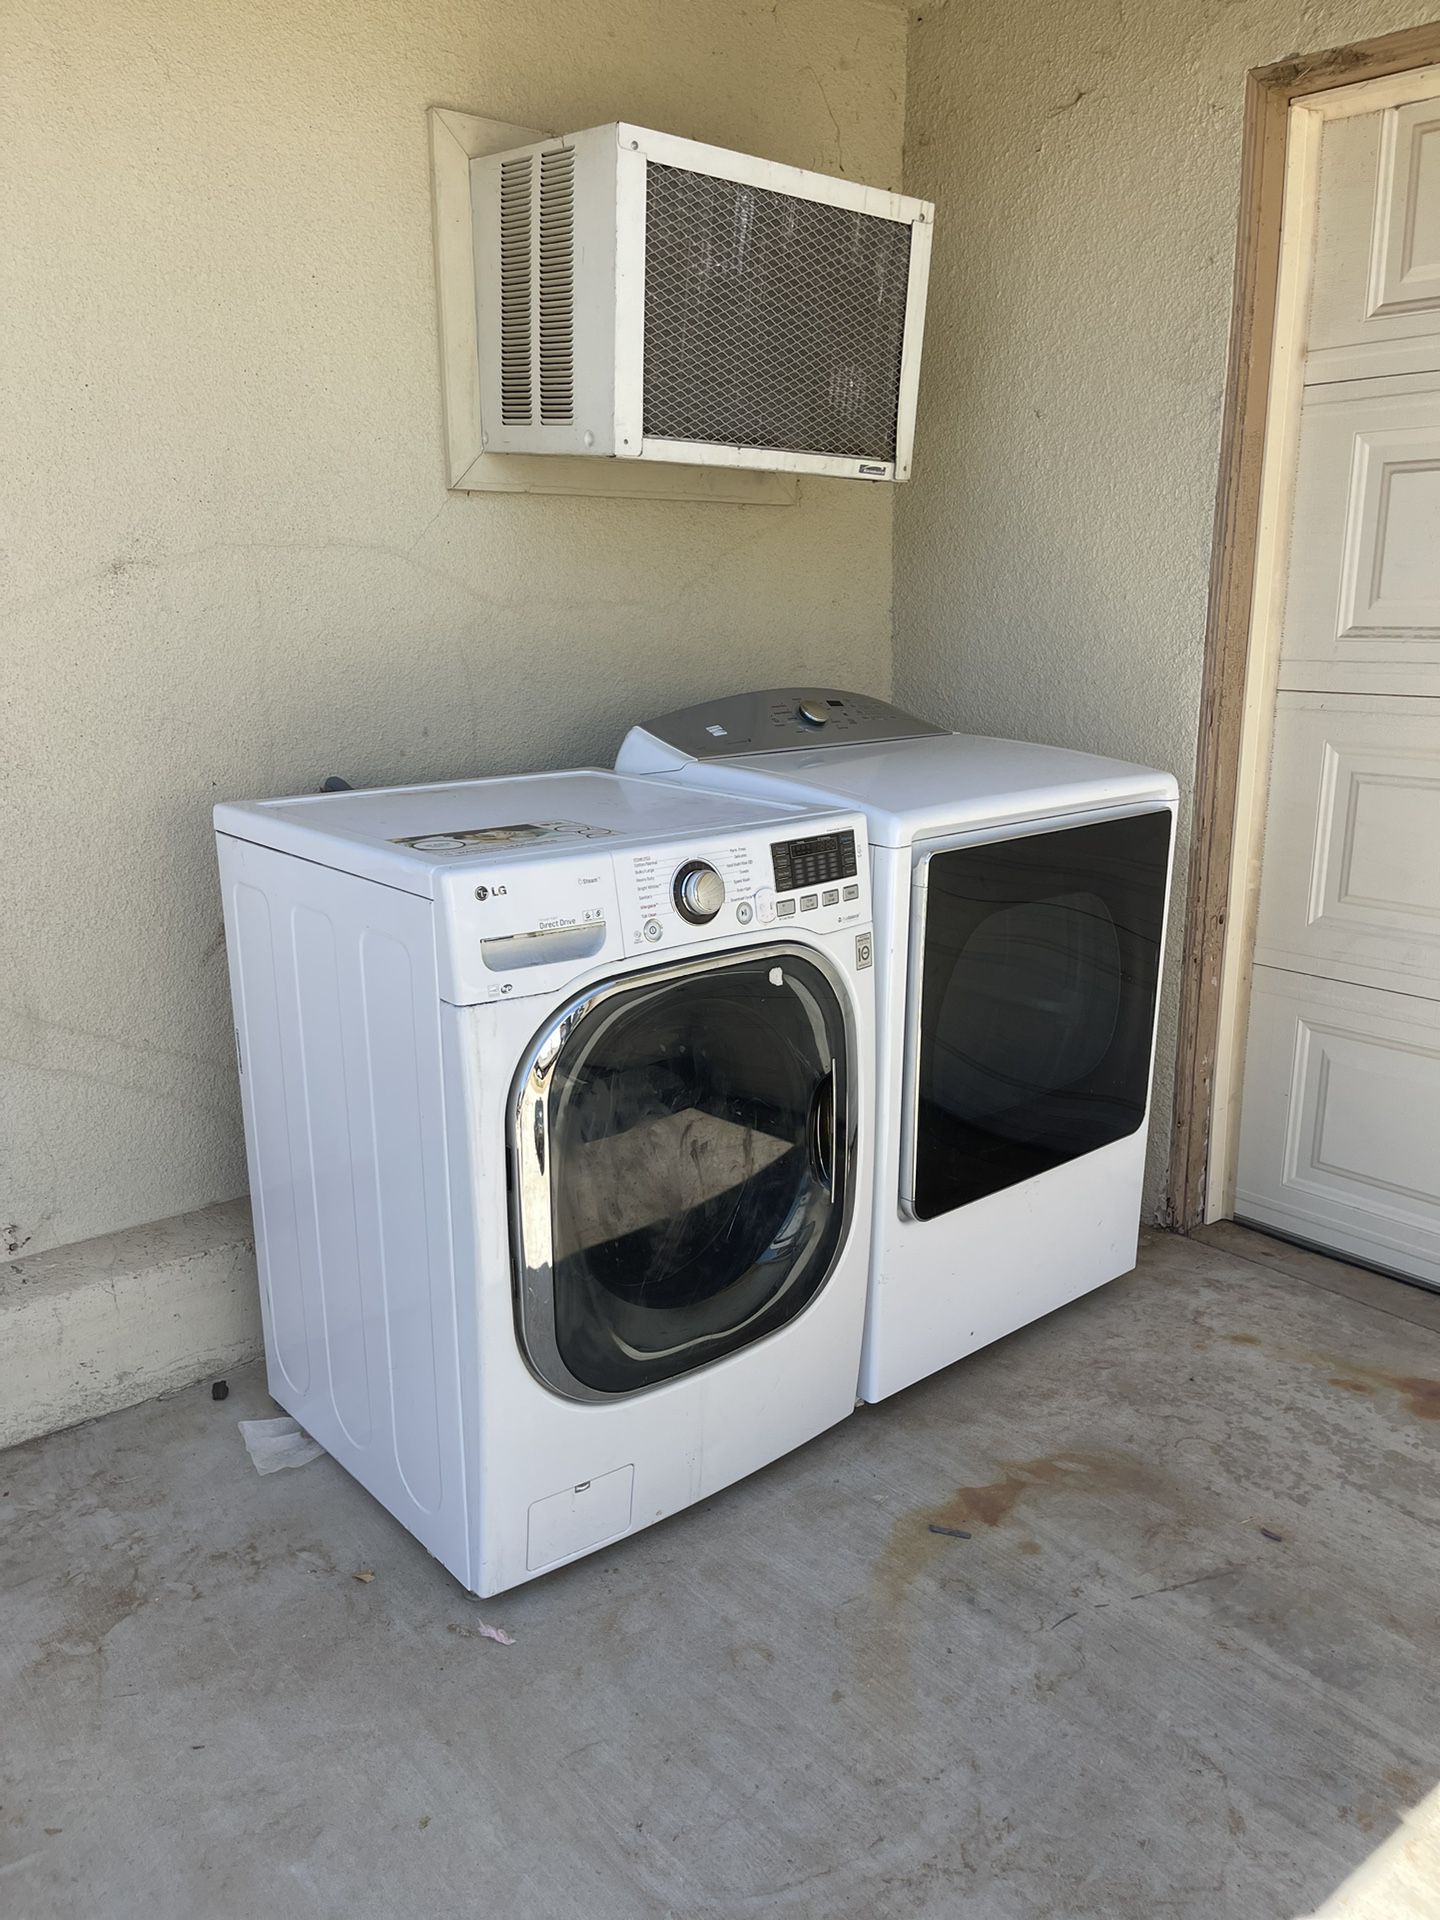 Washer And Gas Dryer. Everything Works Great. I’m Asking $550 Or Best Offer Pick Up Only Need Gone Open To Trades. The only reason why I’m selling it 